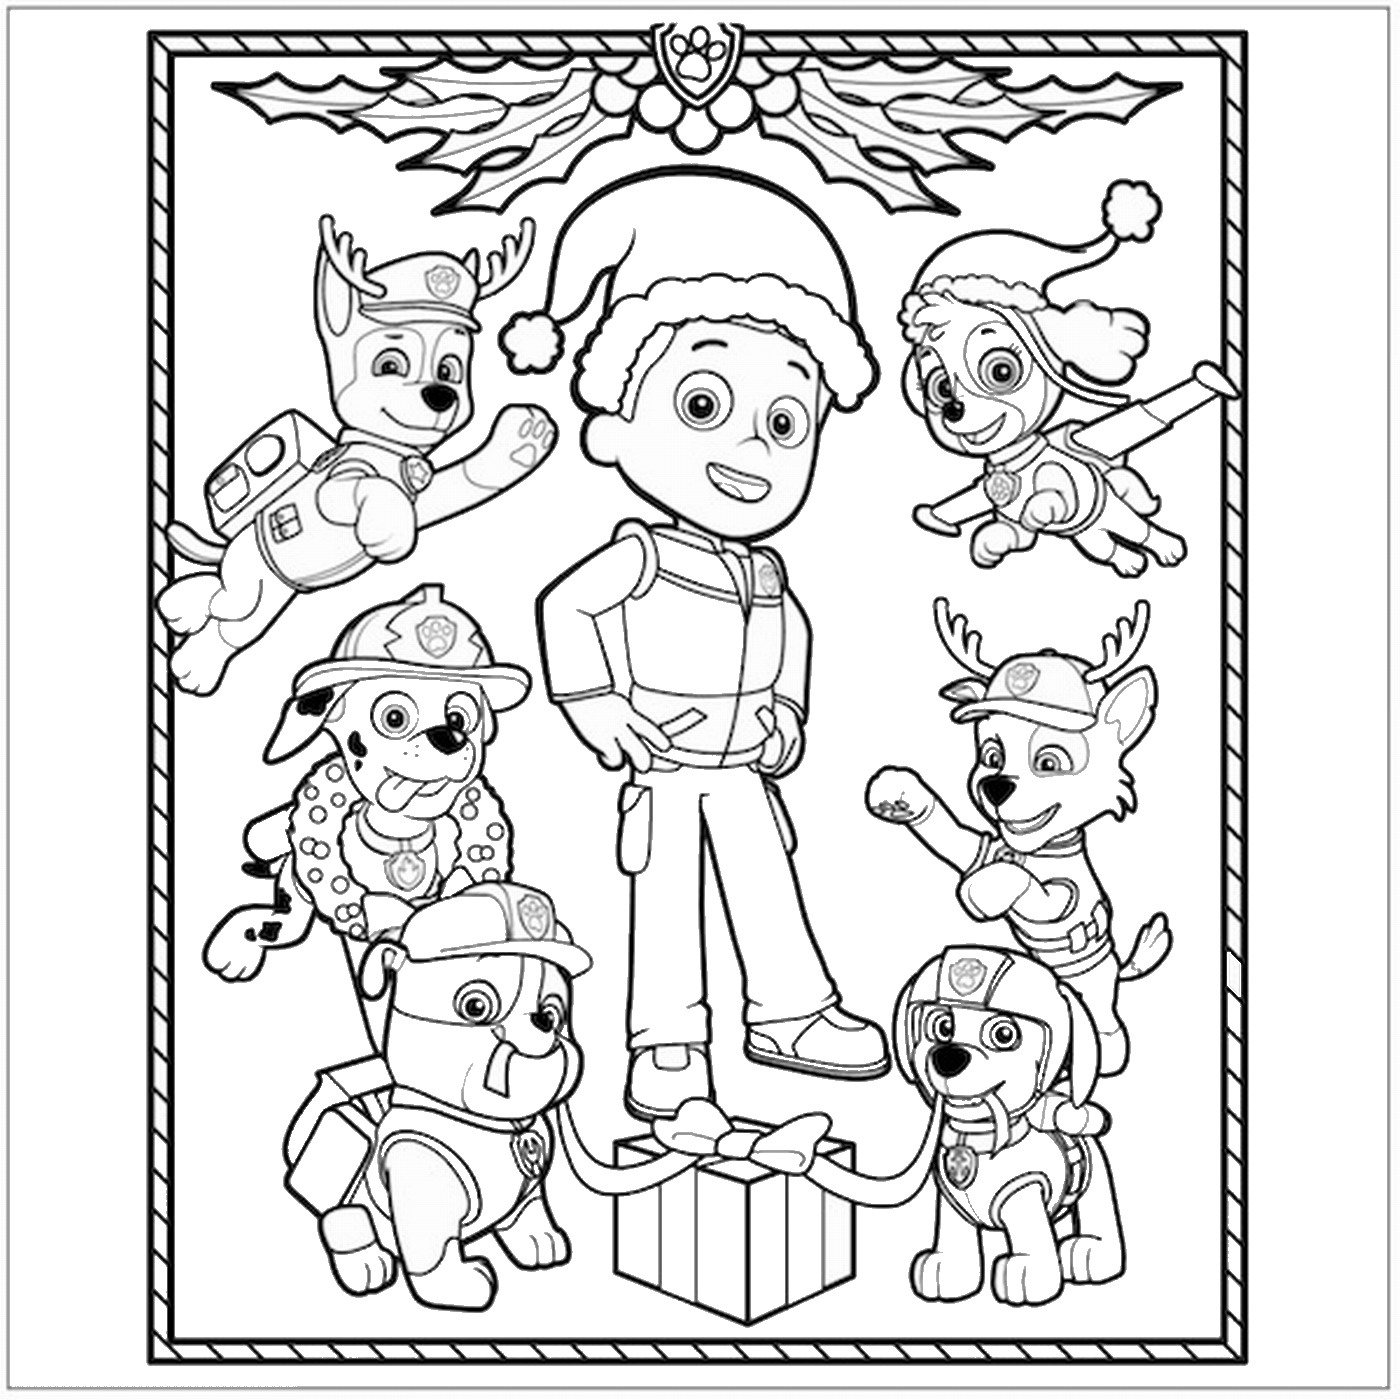 Paw Patrol Coloring Pages - Coloring Home